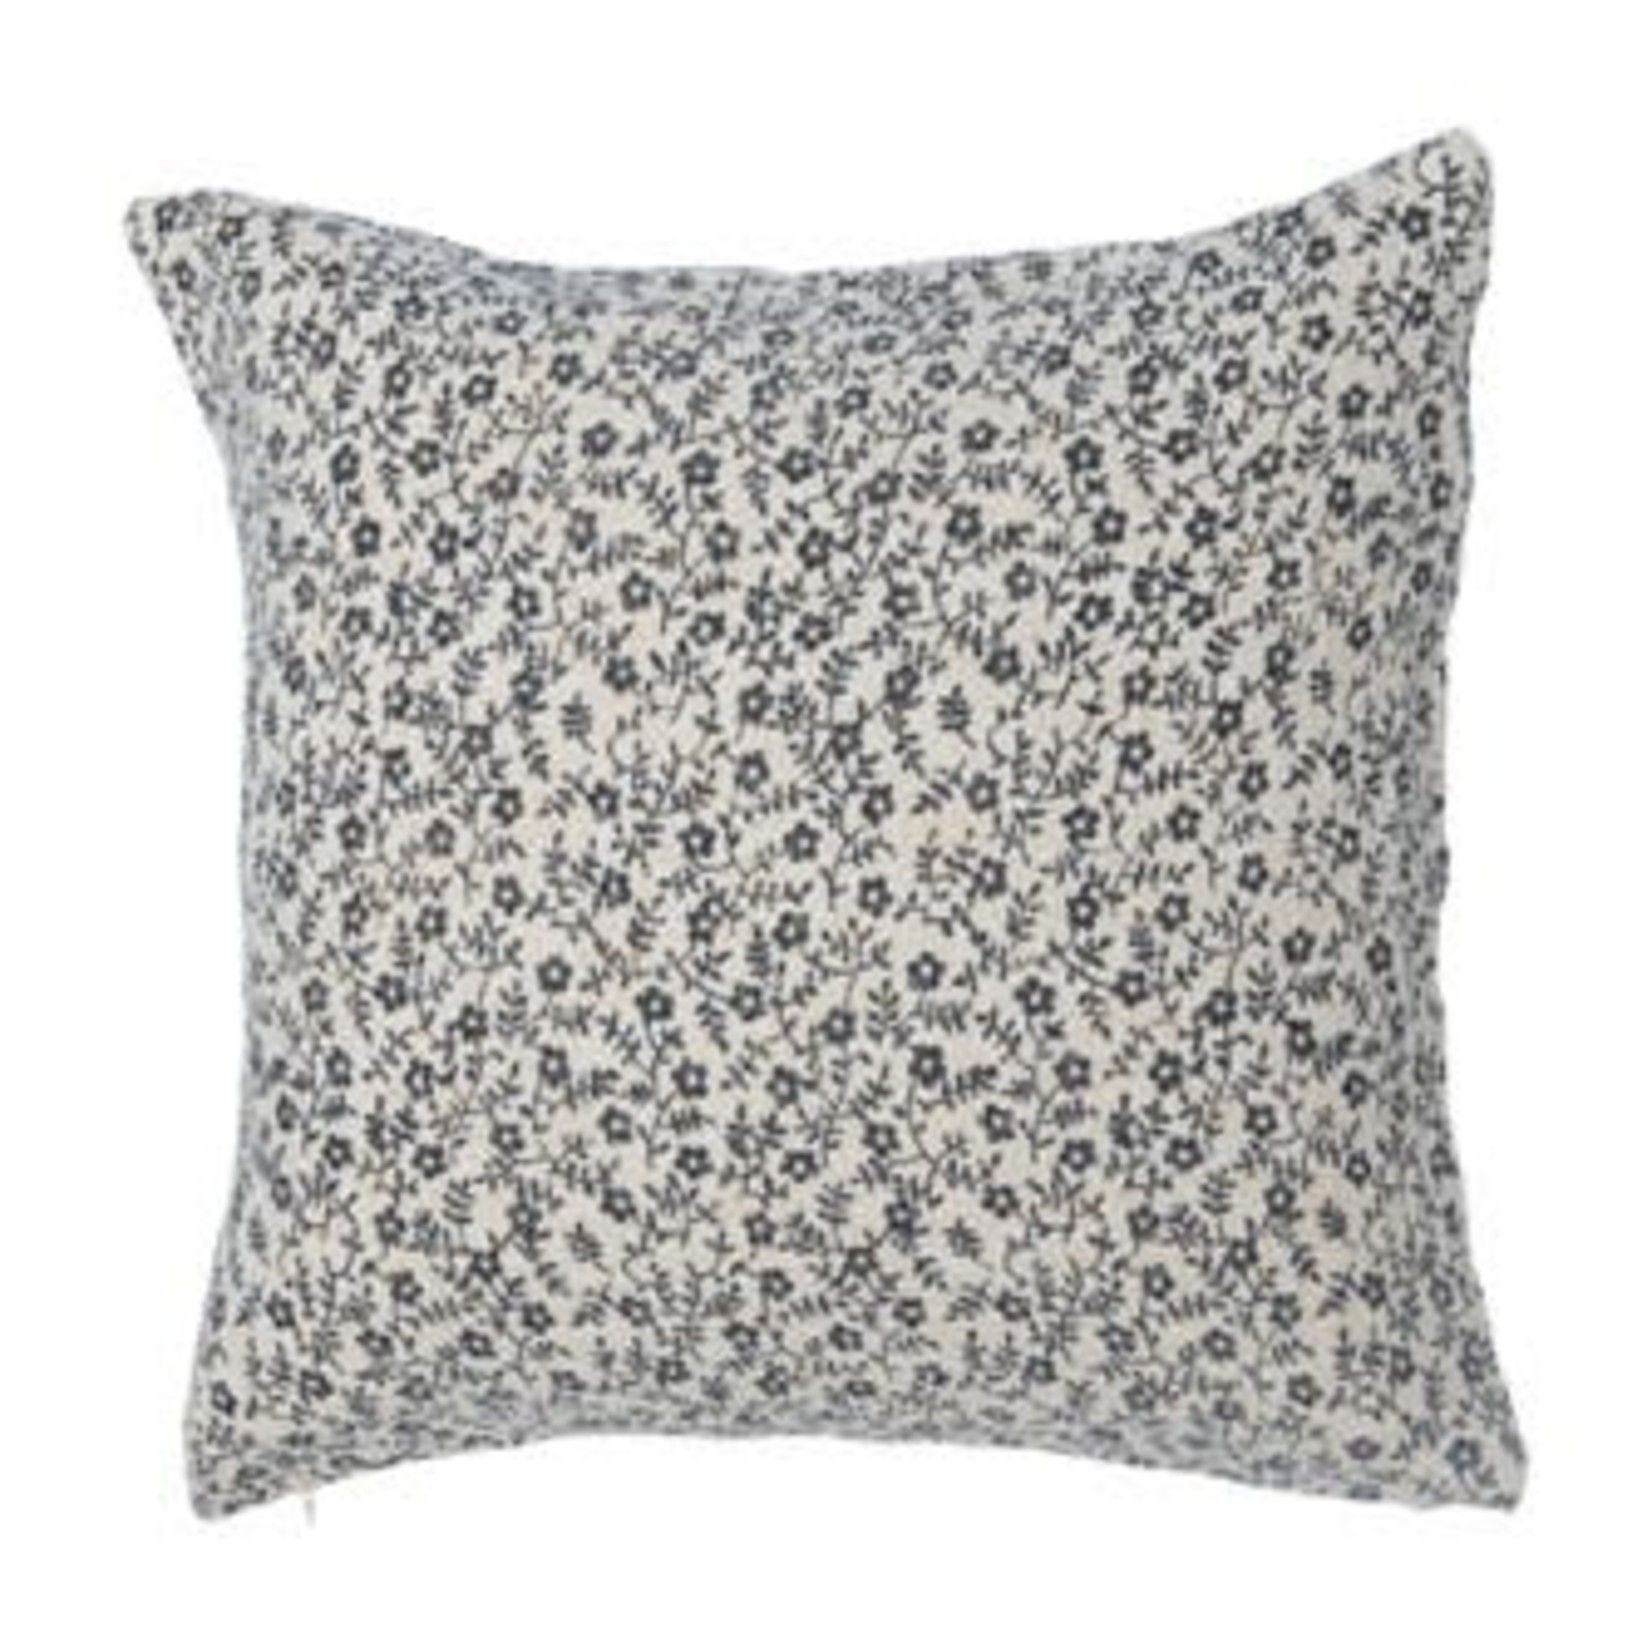 20" Square Cotton Slub Printed Pillow with Floral Pattern, Natural & Black